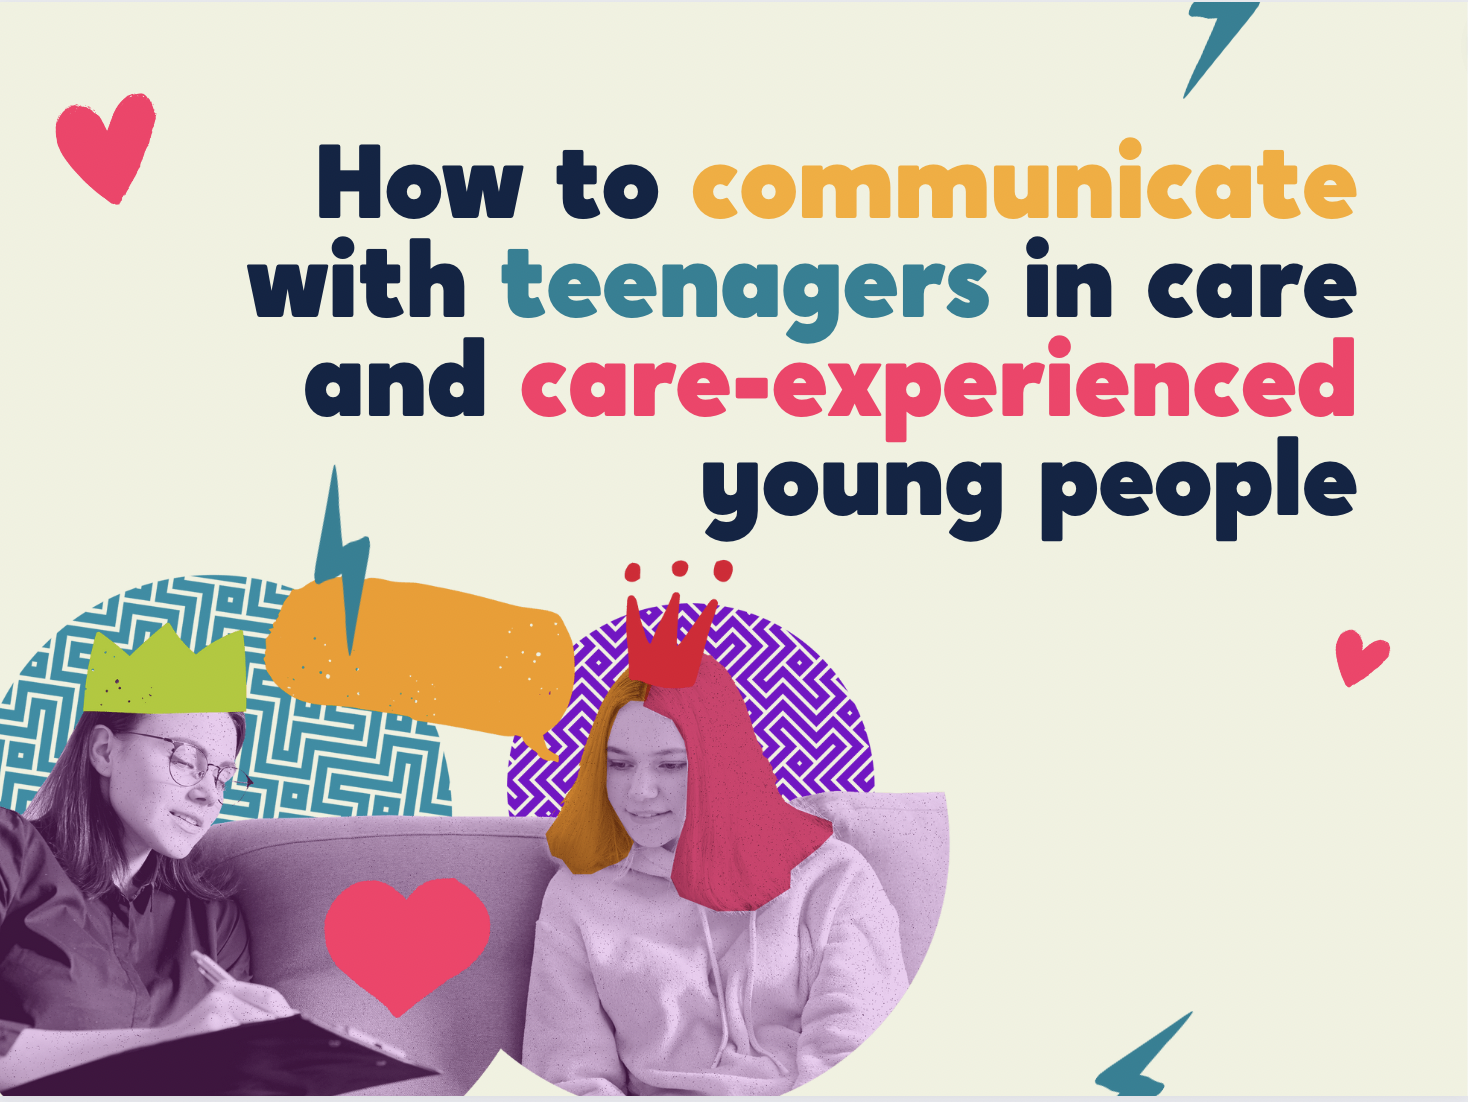 famale social worker talking to teenage care experienced young person. The text reads, How to communicate with teenagers in care and care-experienced young people